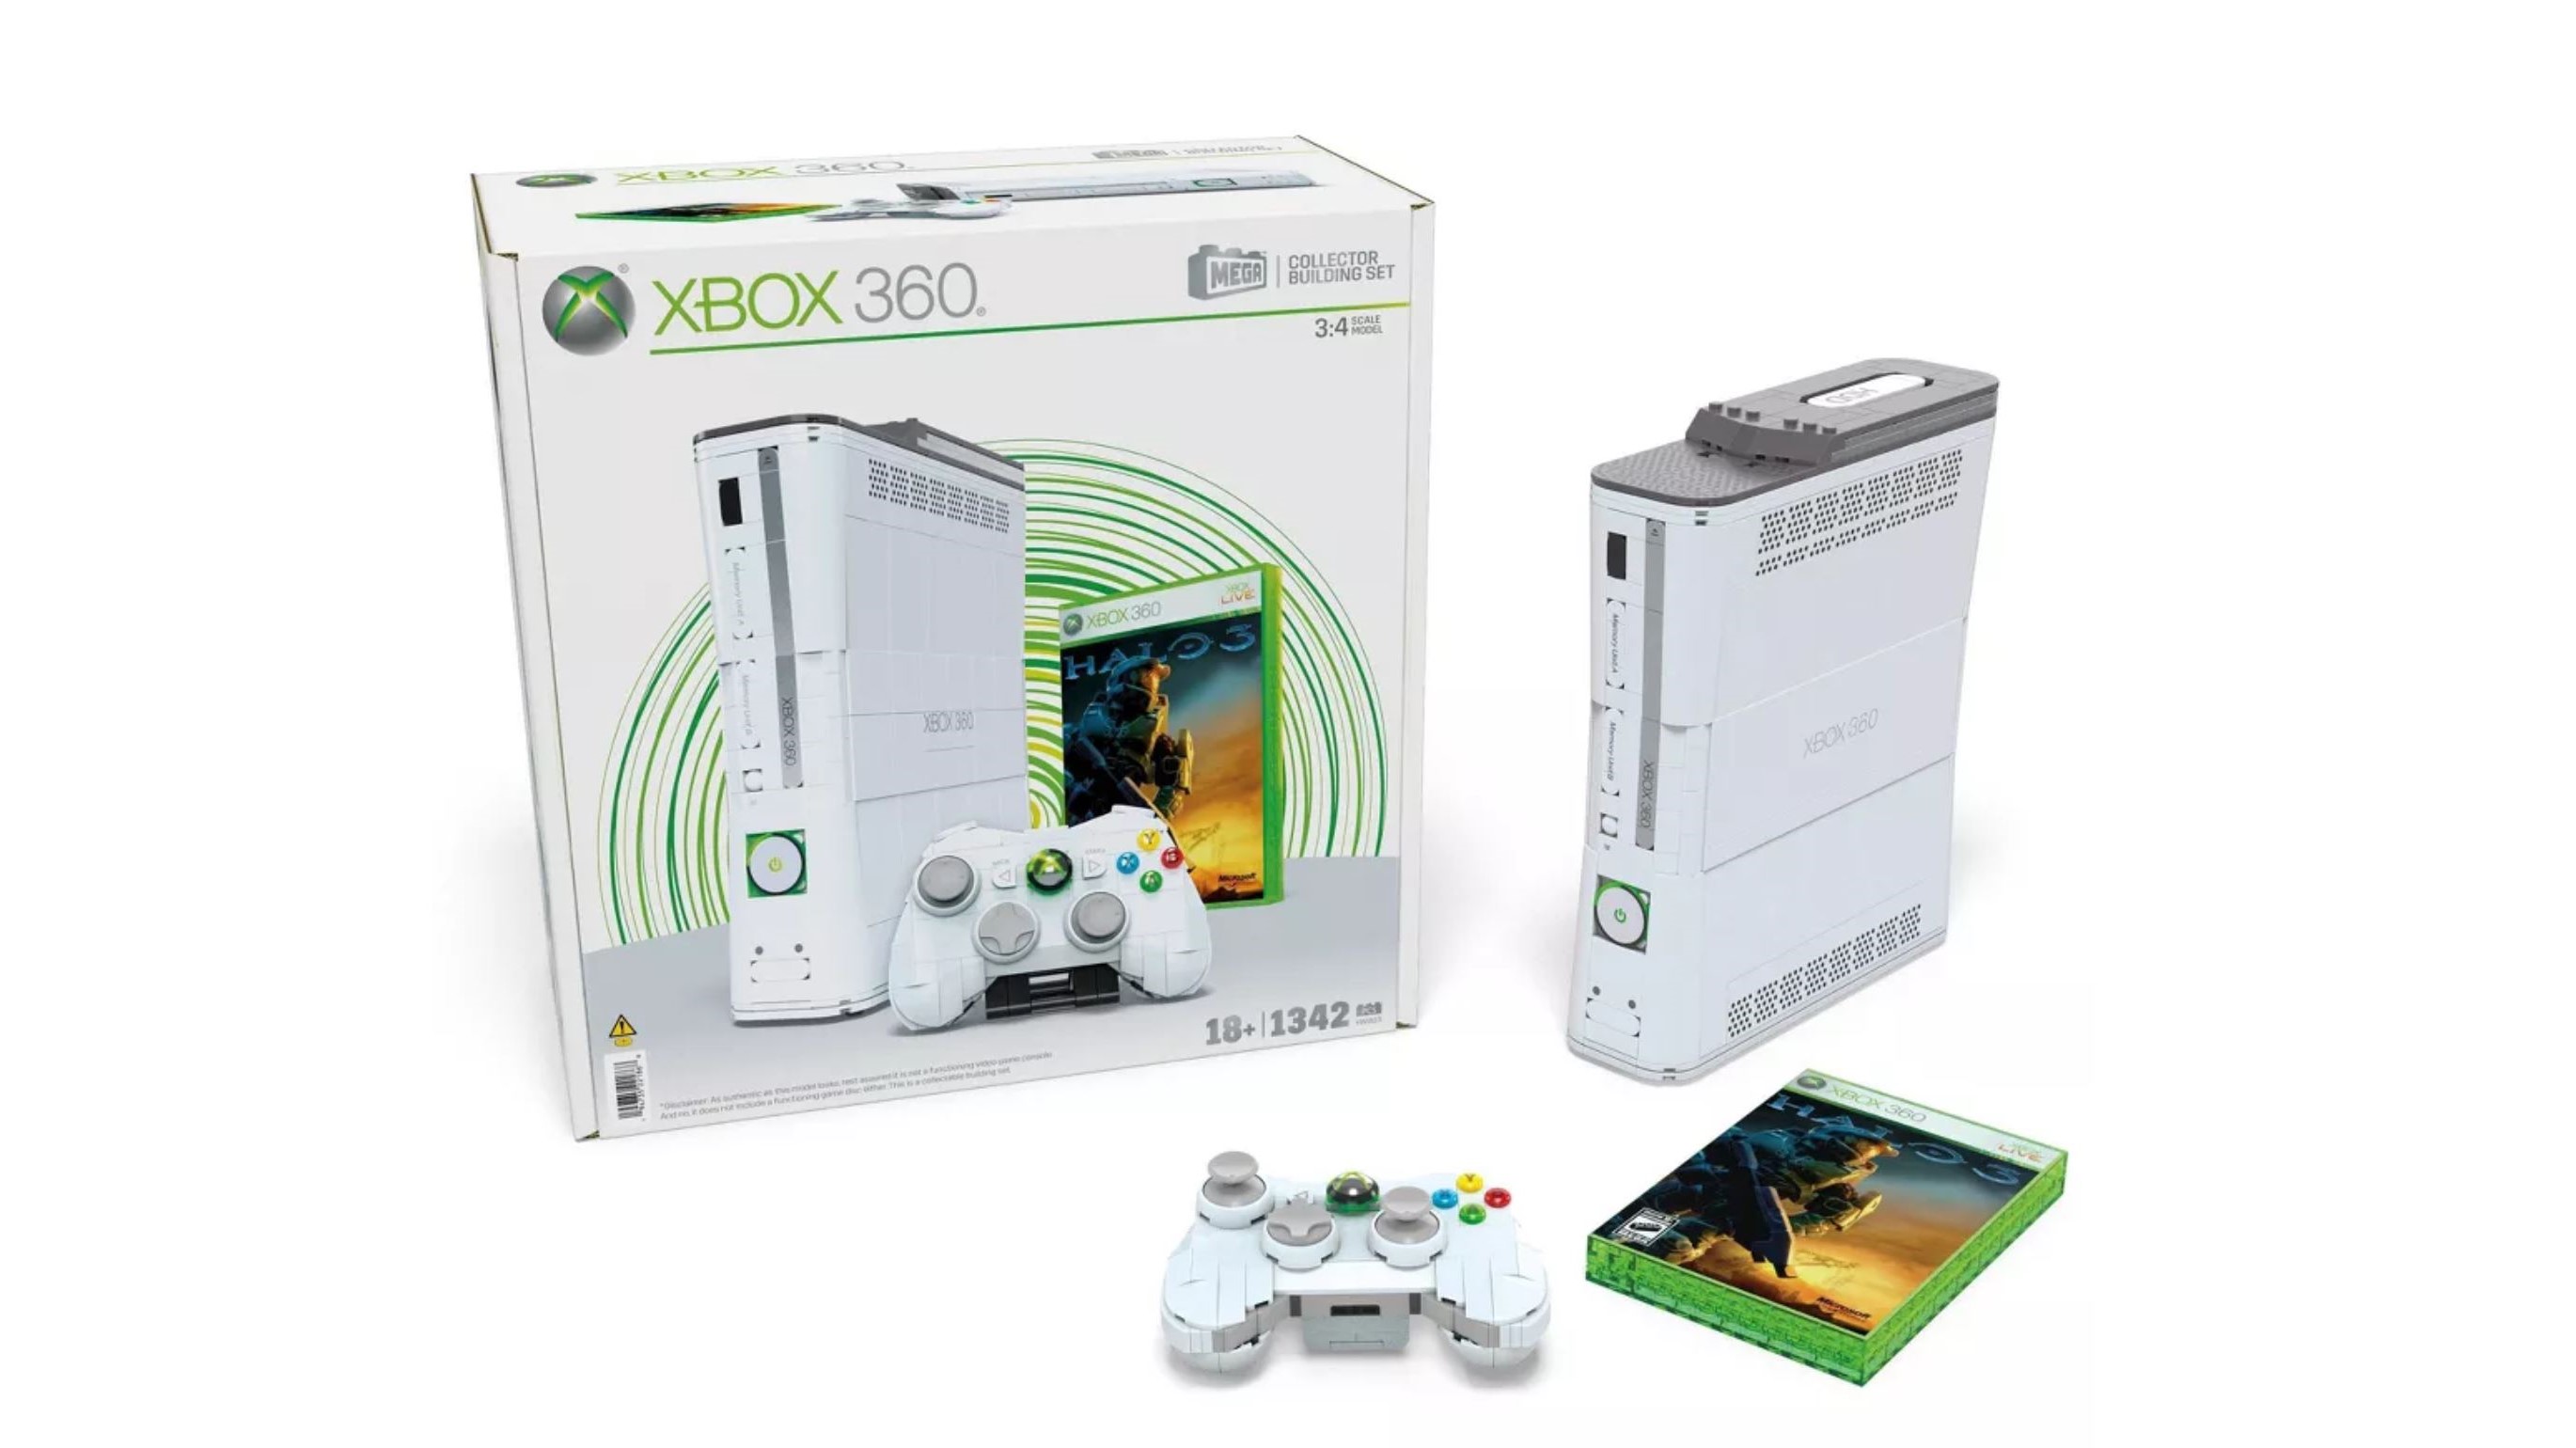 I ponder if this new Mega Blok Xbox 360 comes with a purple ring